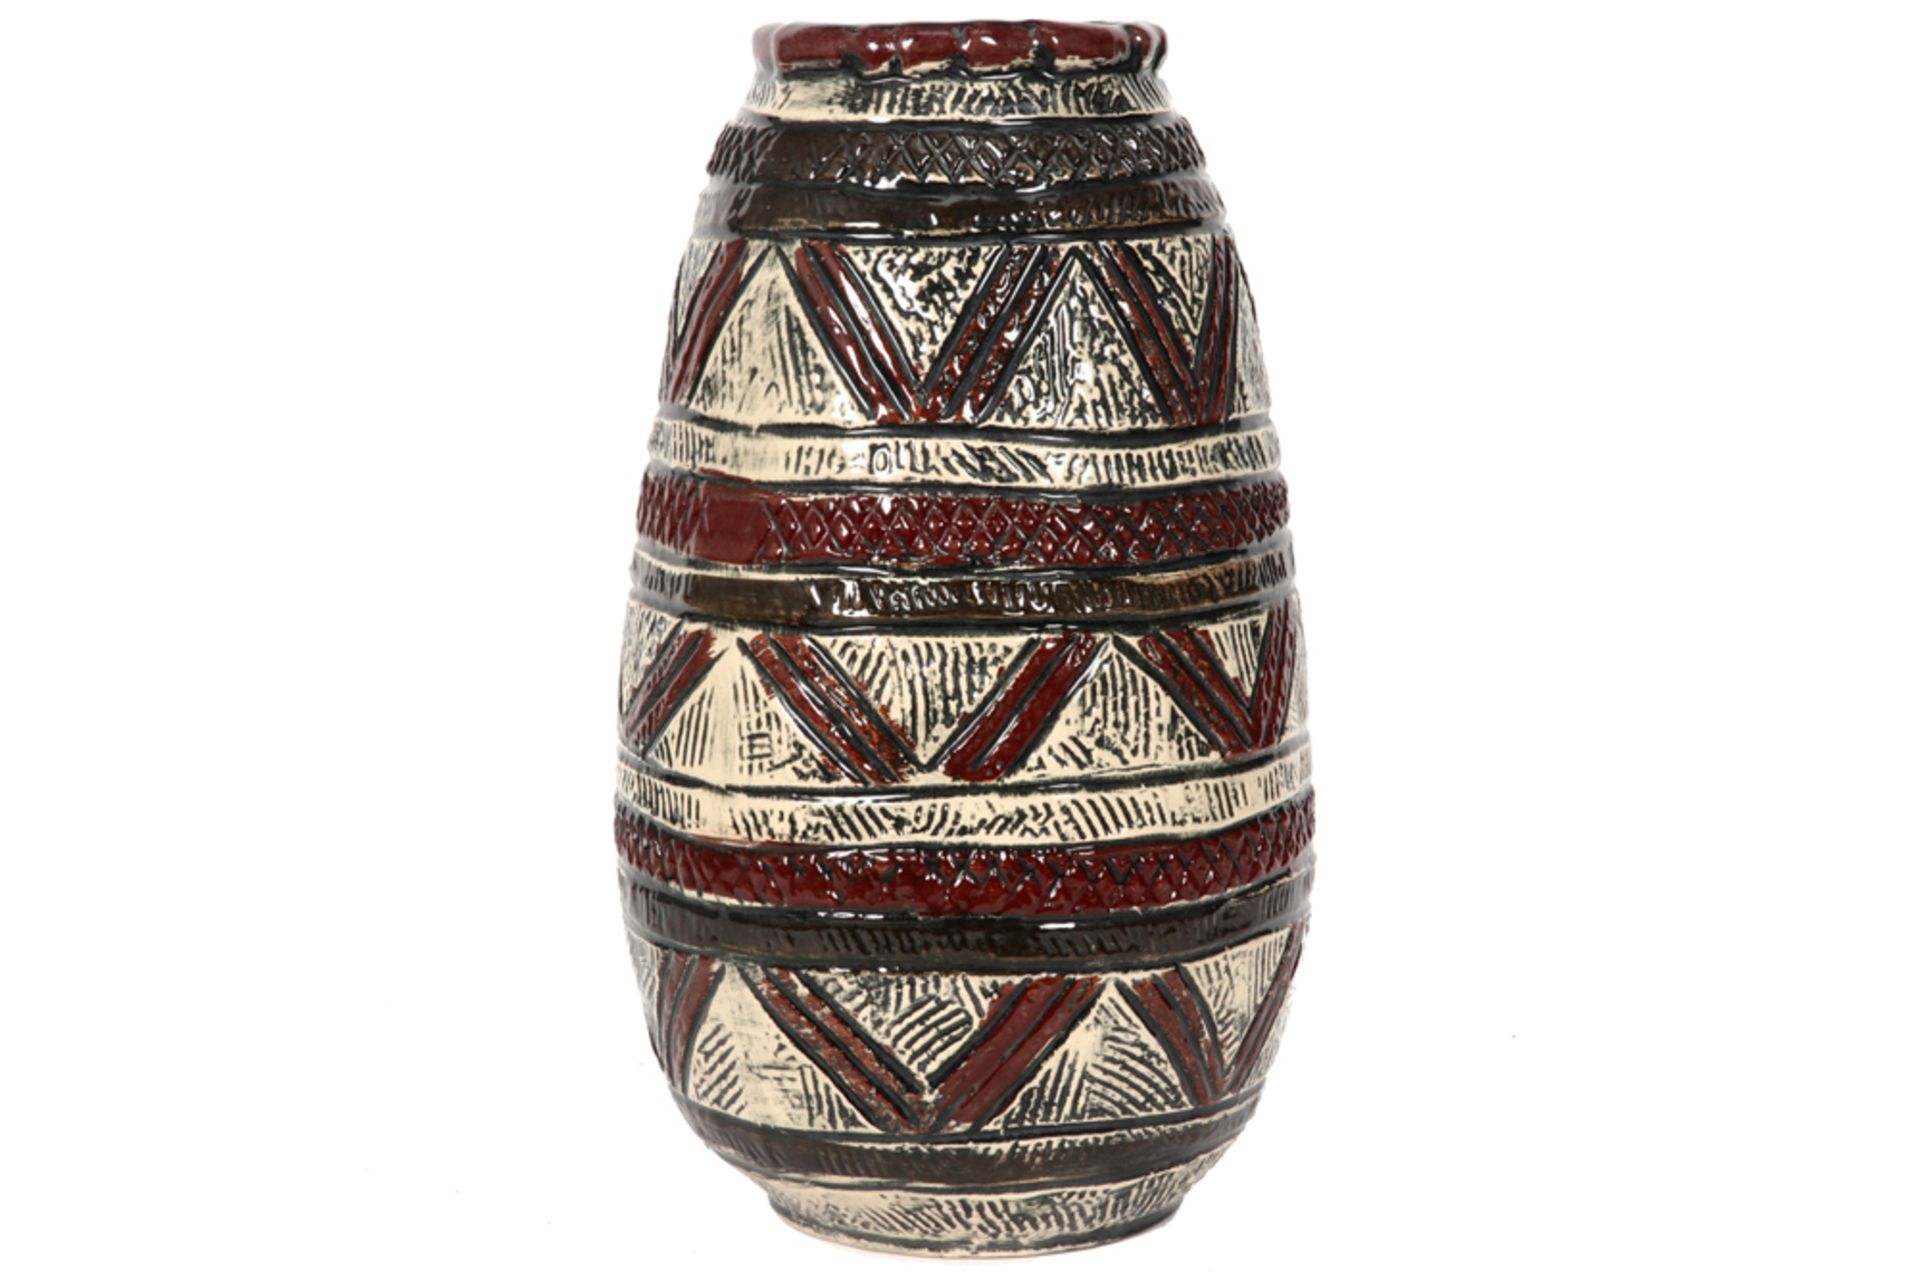 fifties' vase with a Josef Koch design from the "Congo" series in earthenware, marked "Bay - West